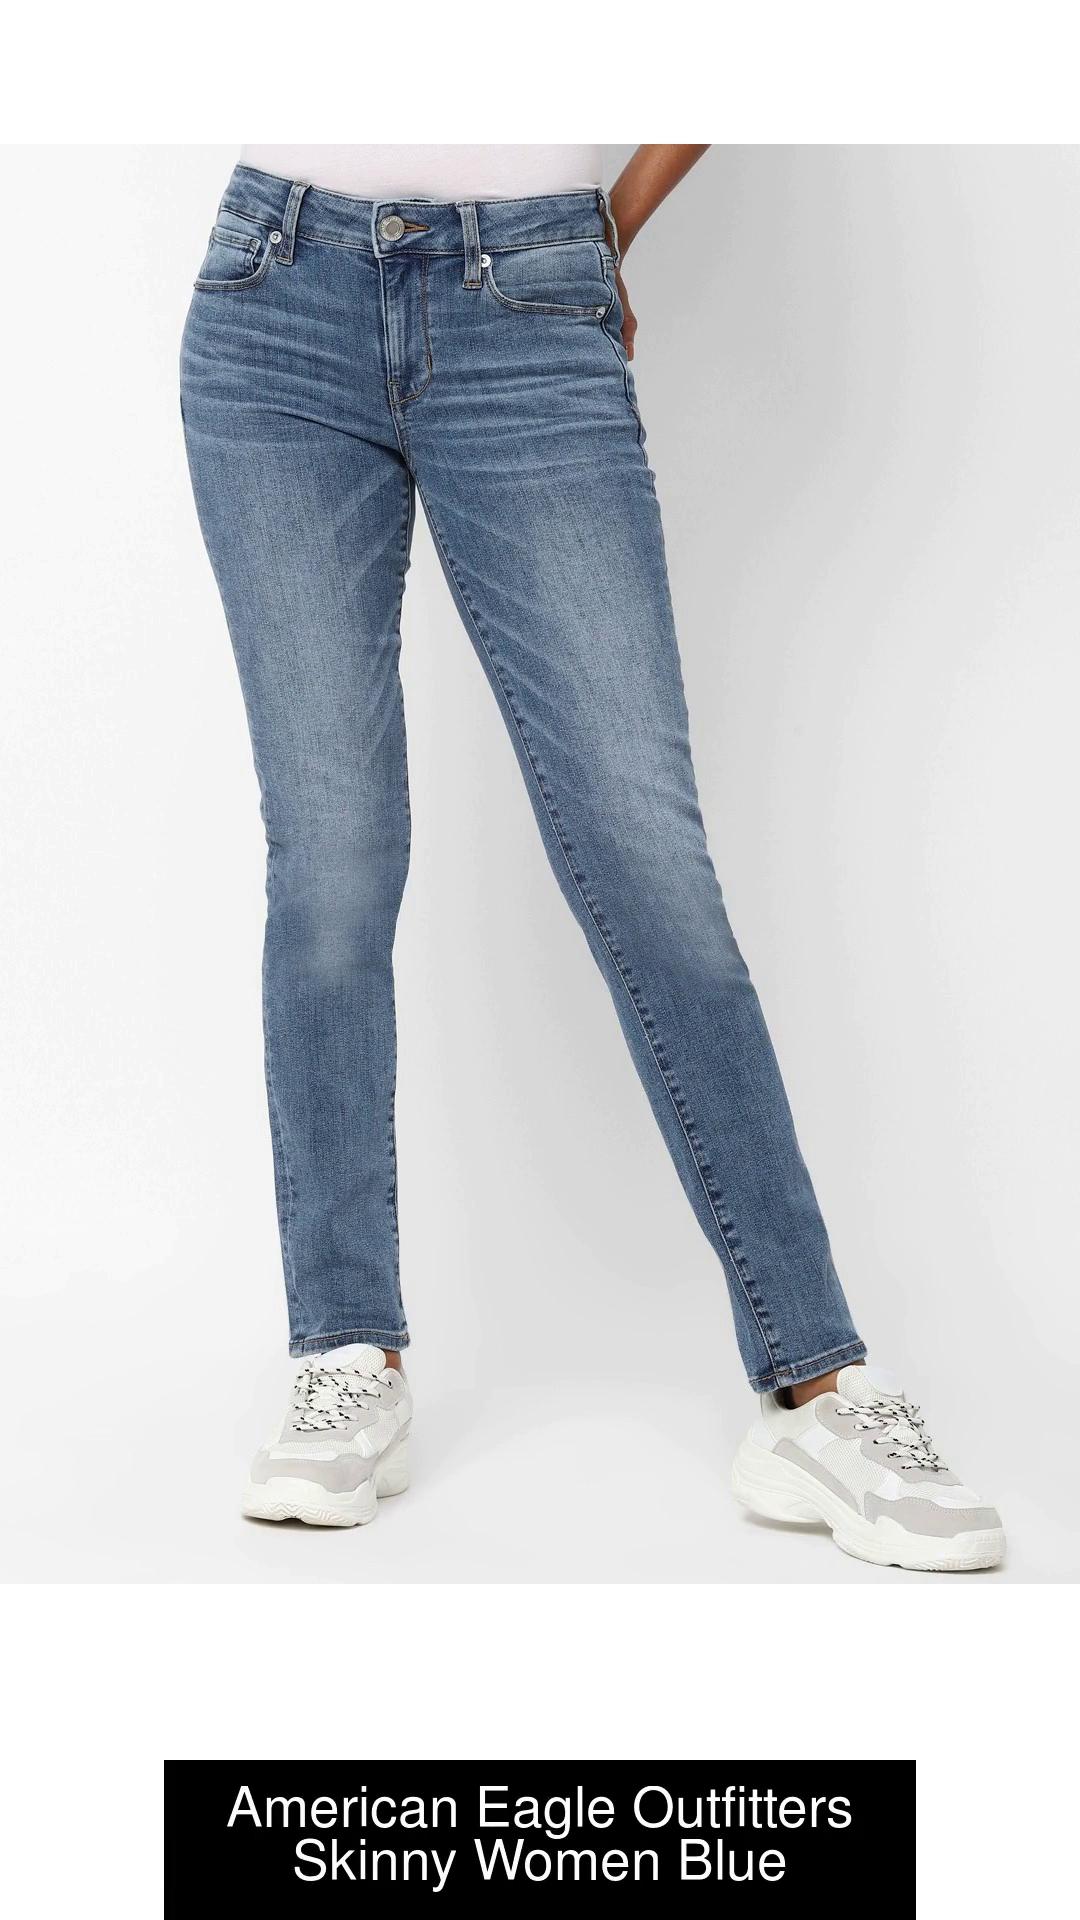 Buy American Eagle Outfitters White Jeggings for Women's Online